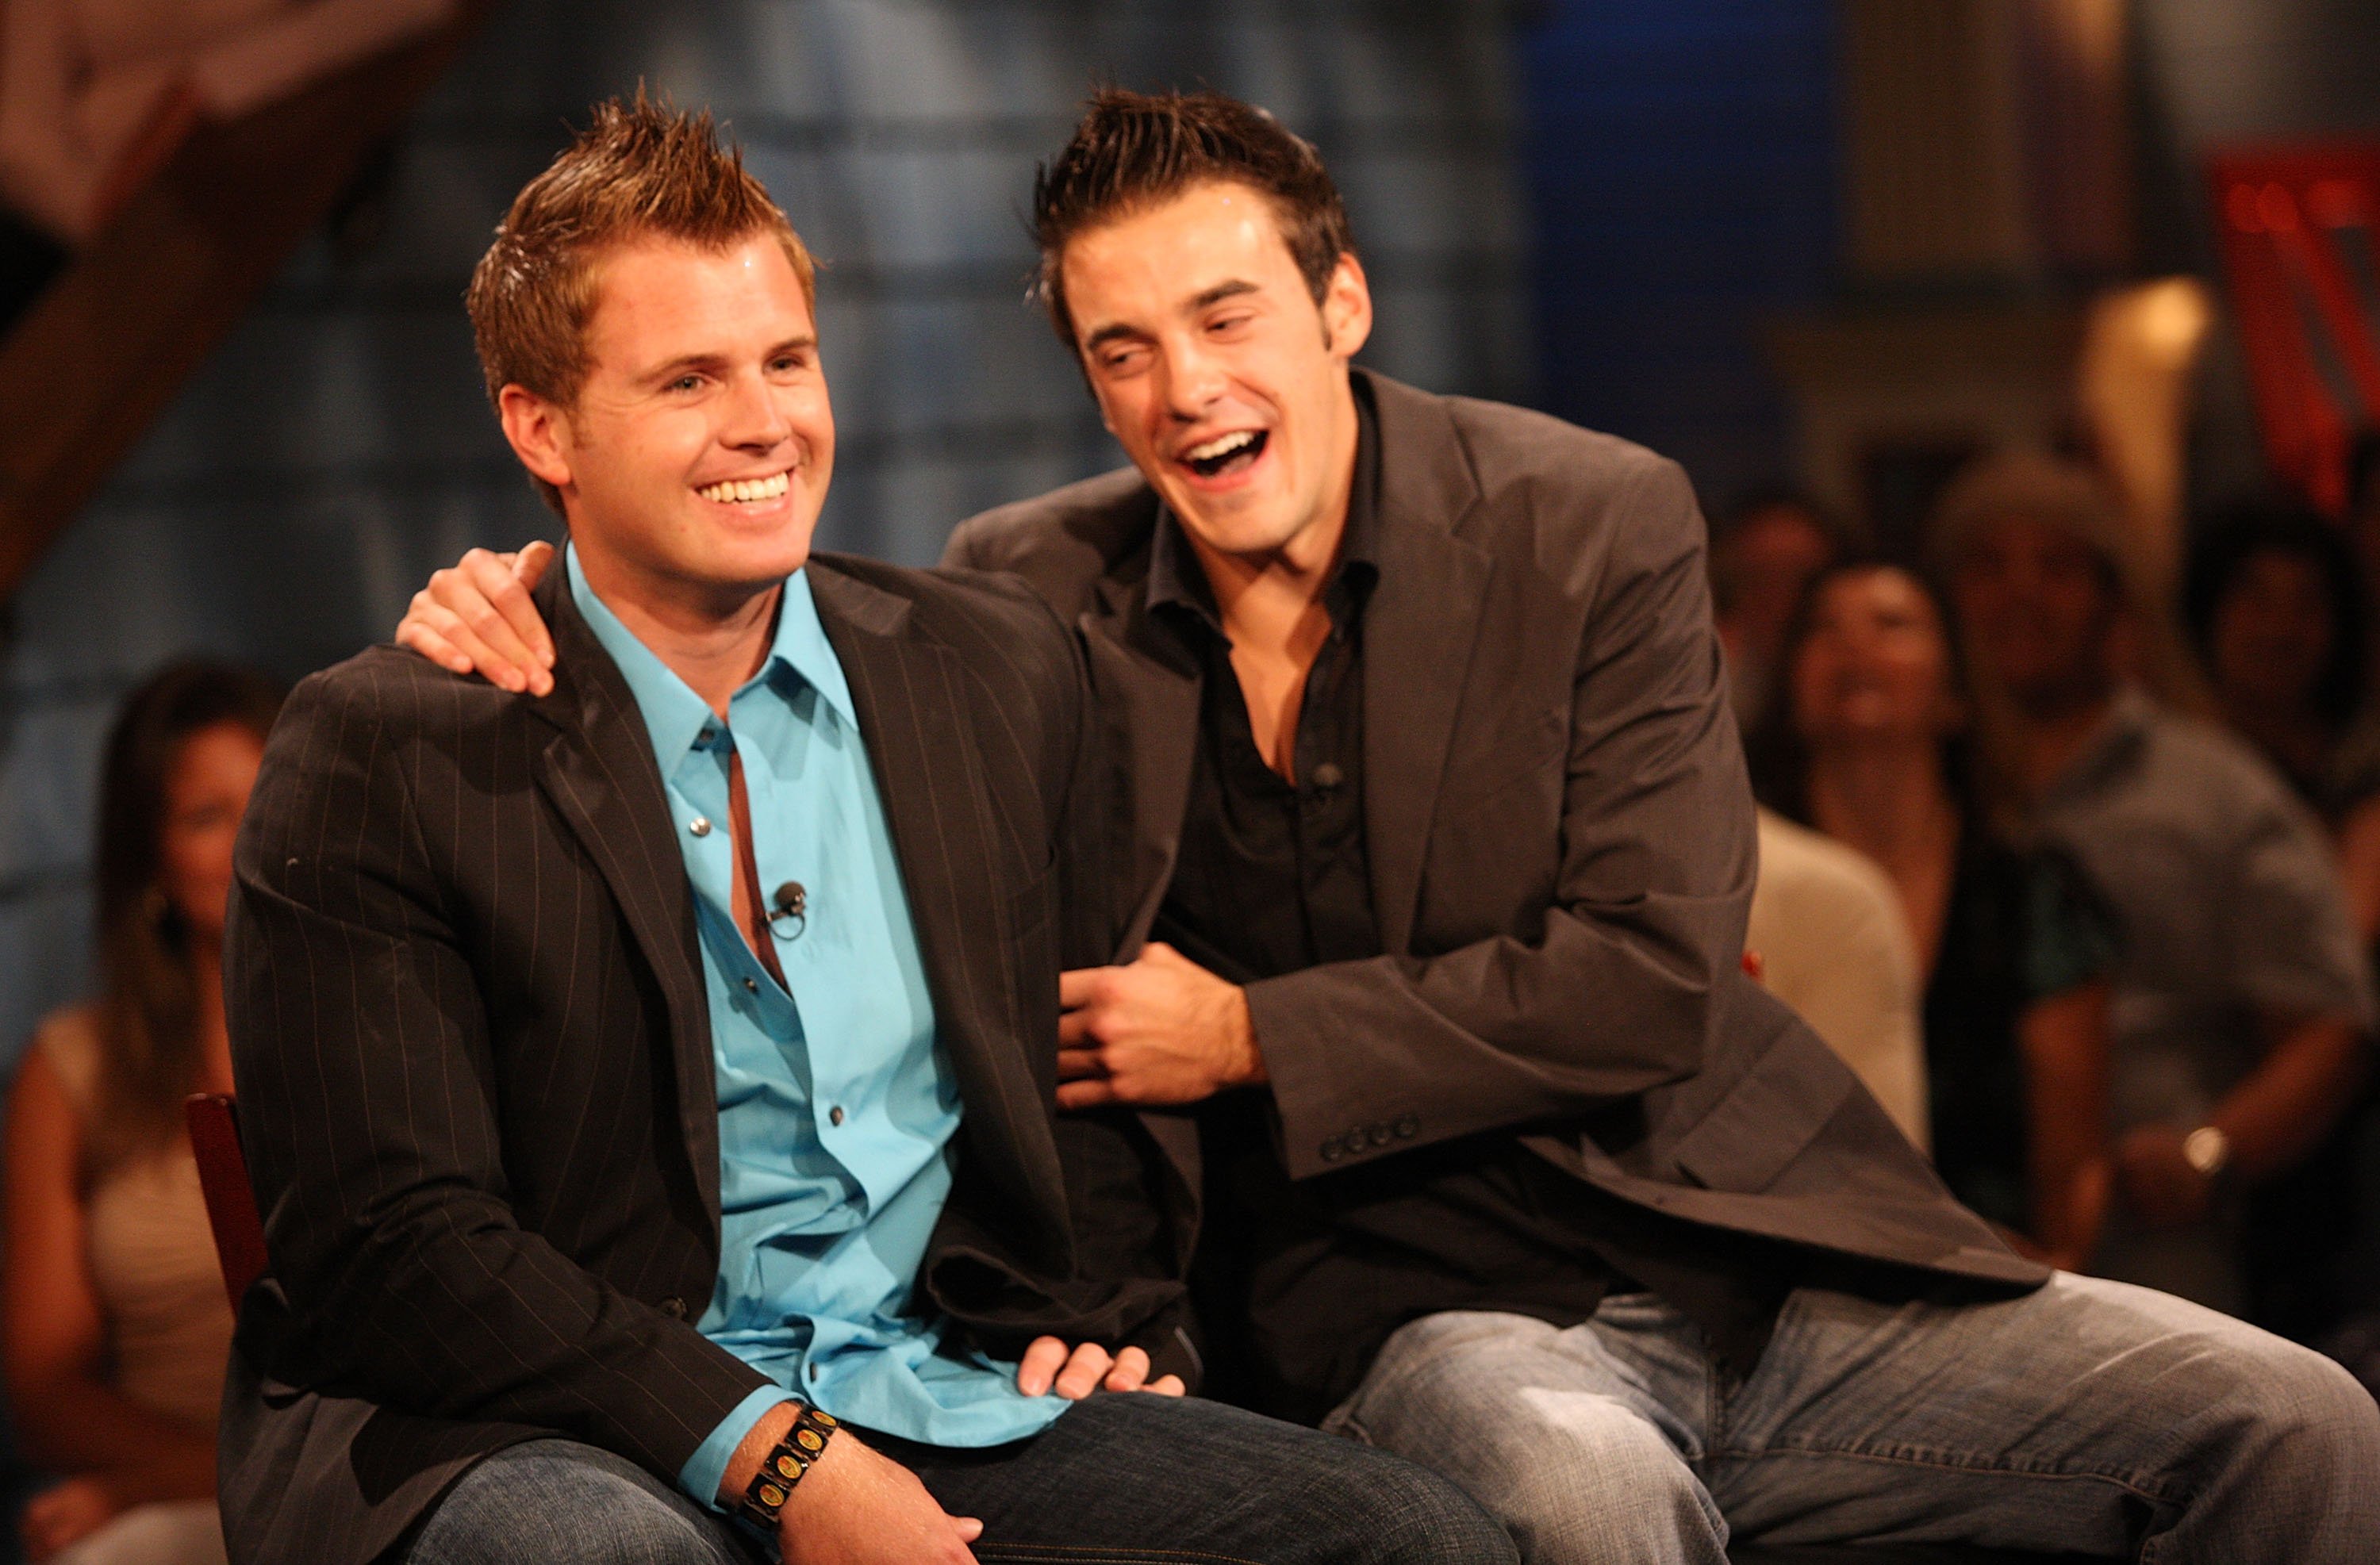 Second place contestant Memphis Garrett (L) and Dan Gheesling the winner of the Big Brother Season 10 Grand Finale